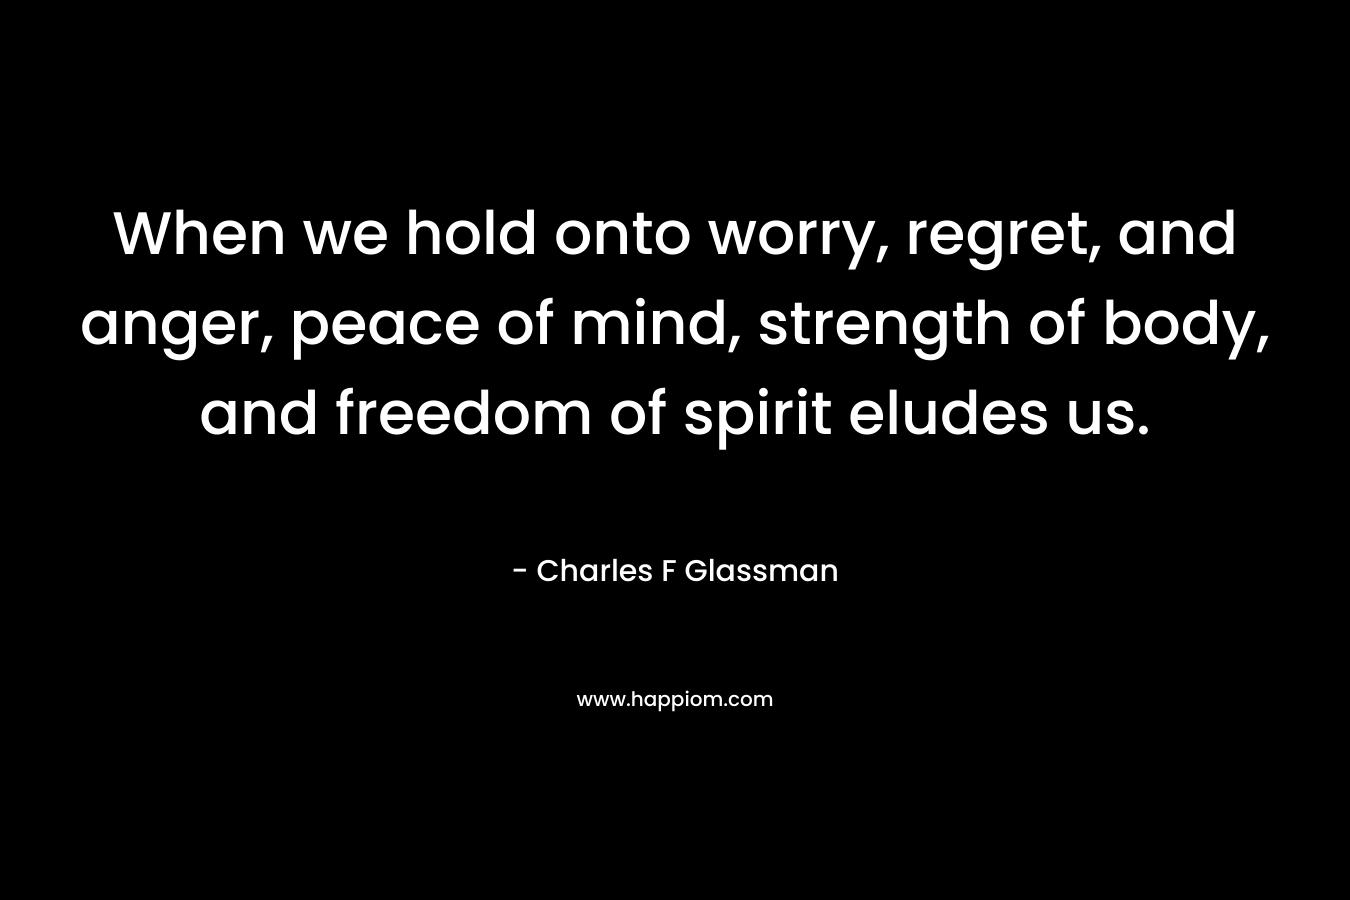 When we hold onto worry, regret, and anger, peace of mind, strength of body, and freedom of spirit eludes us.